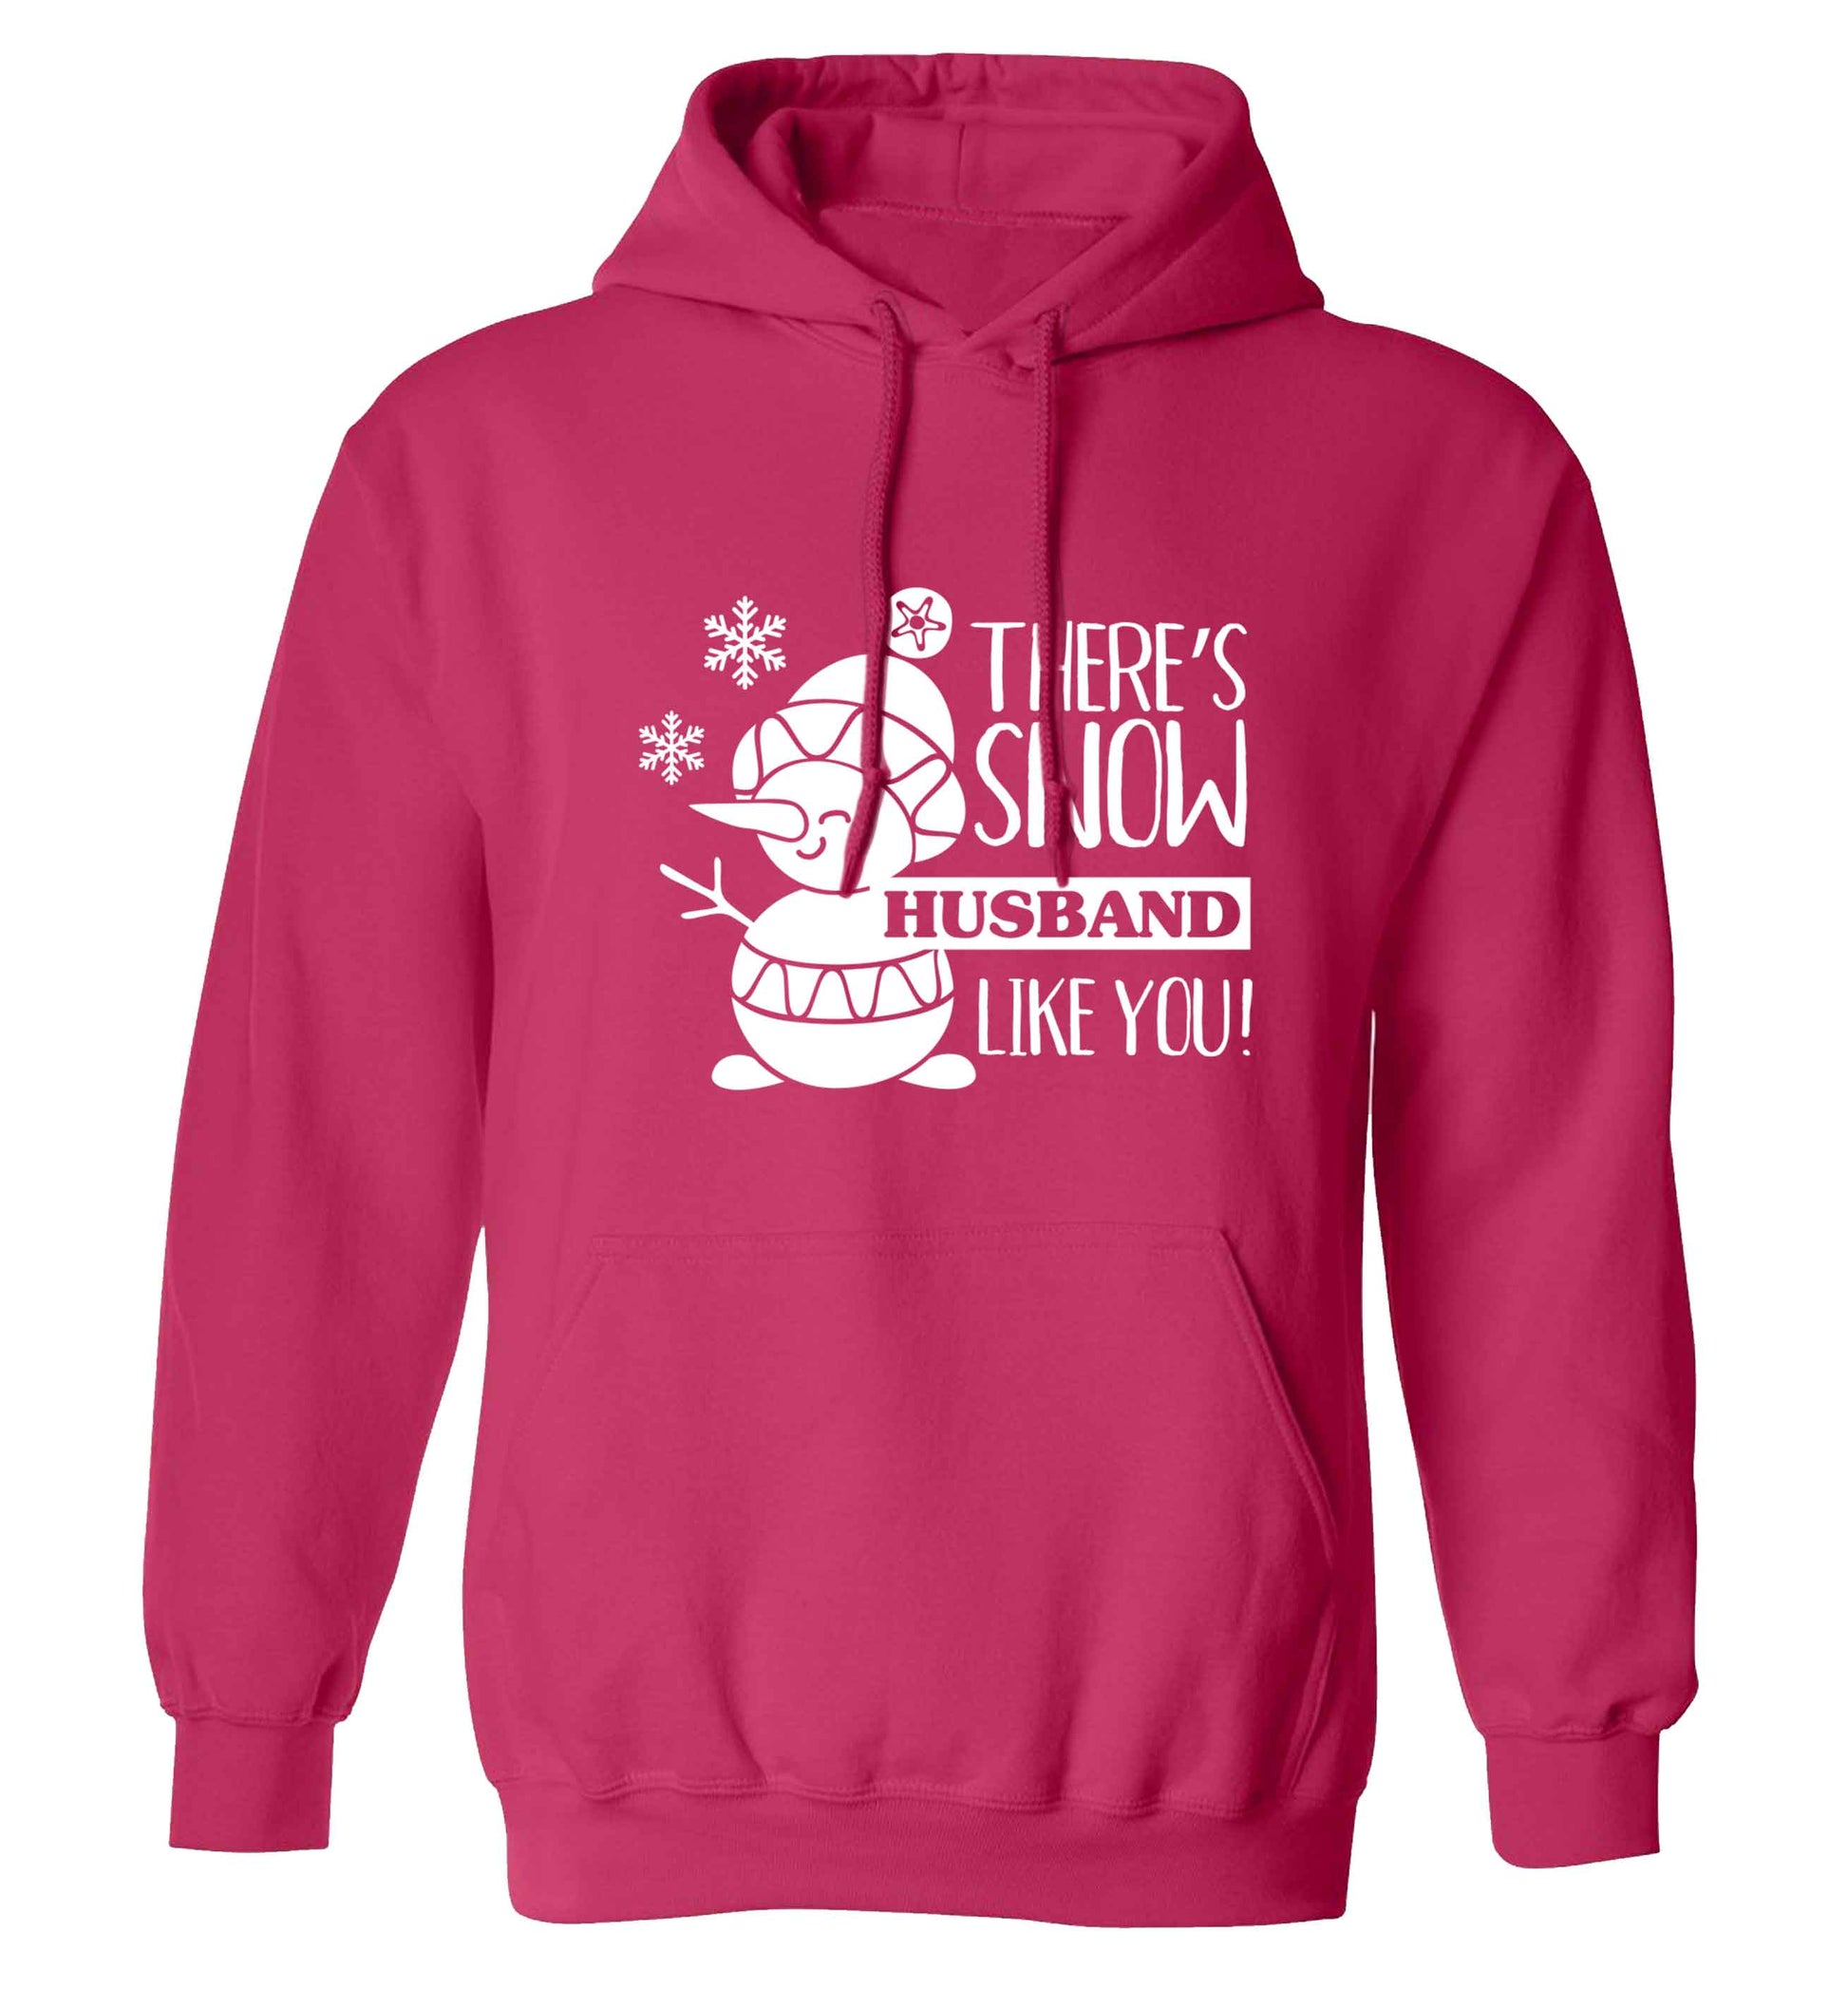 There's snow husband like you adults unisex pink hoodie 2XL